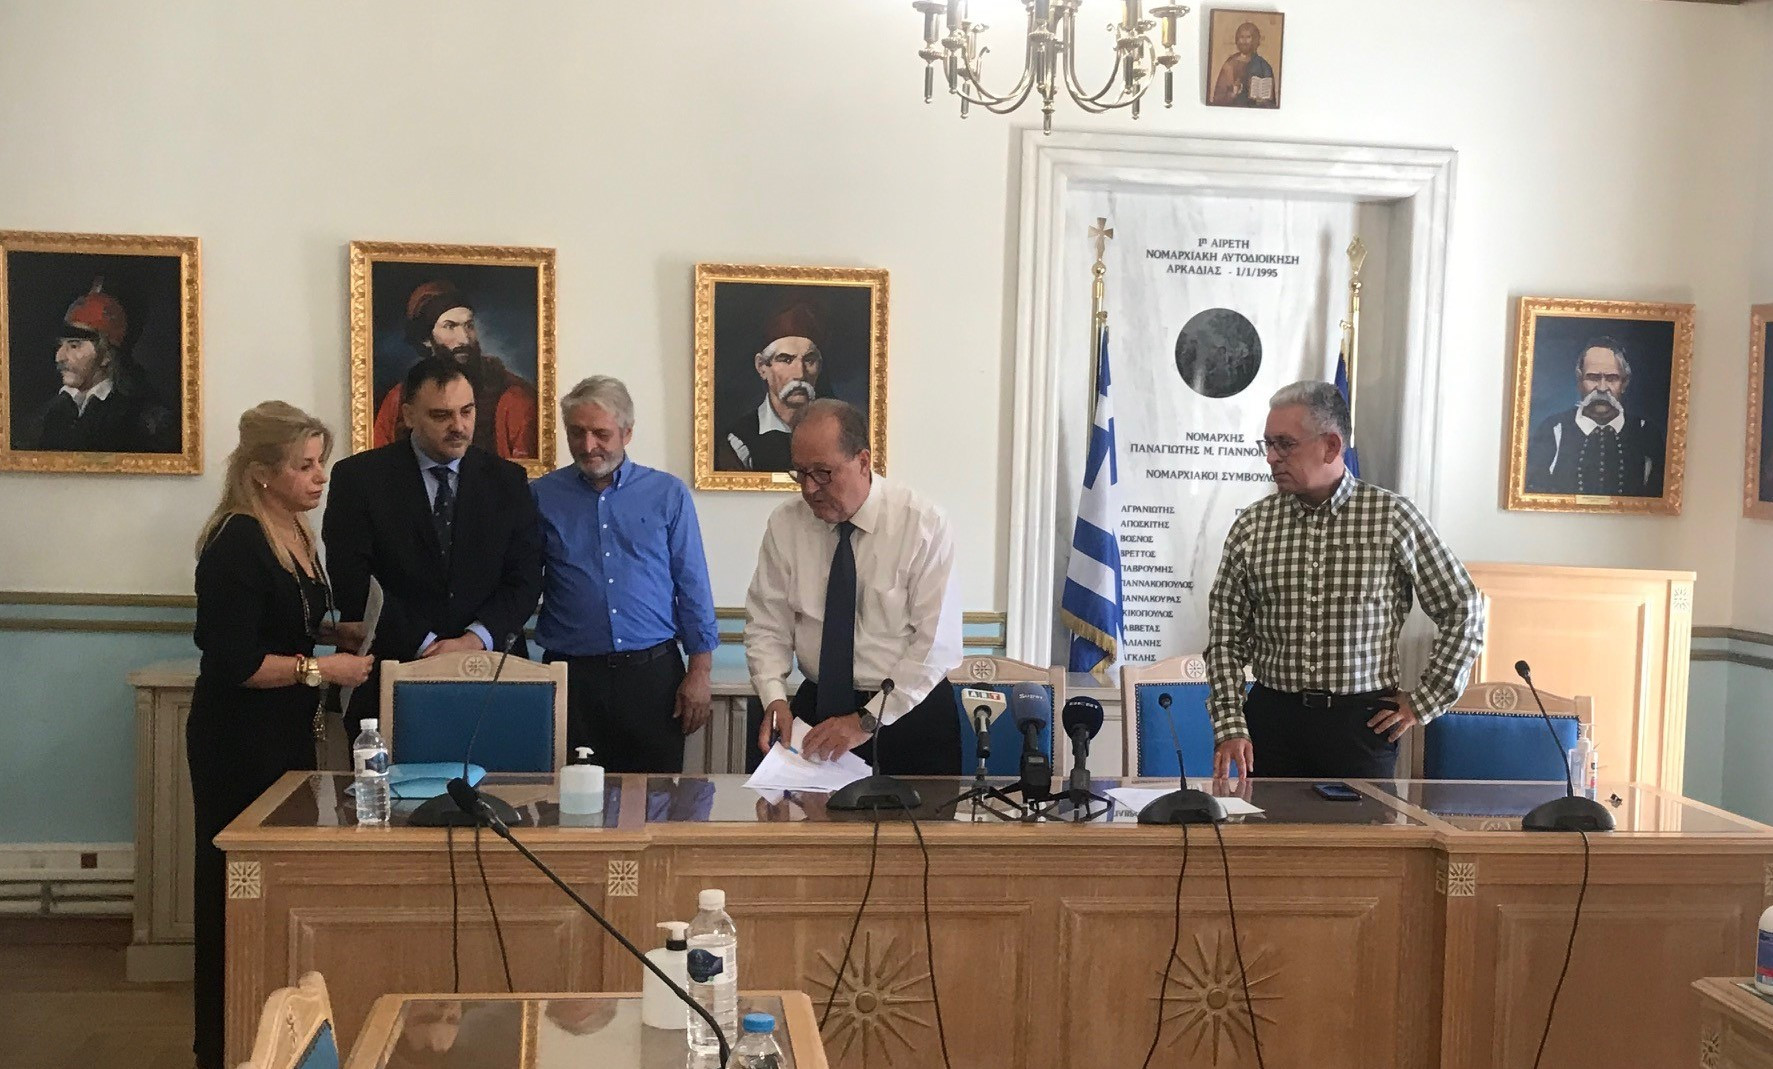 Peloponnese Region and the association of companies SingularLogic - Space Hellas - Top Vision signed the contract for the Upgrading the Safety of the Road Network of the Peloponnese Region project